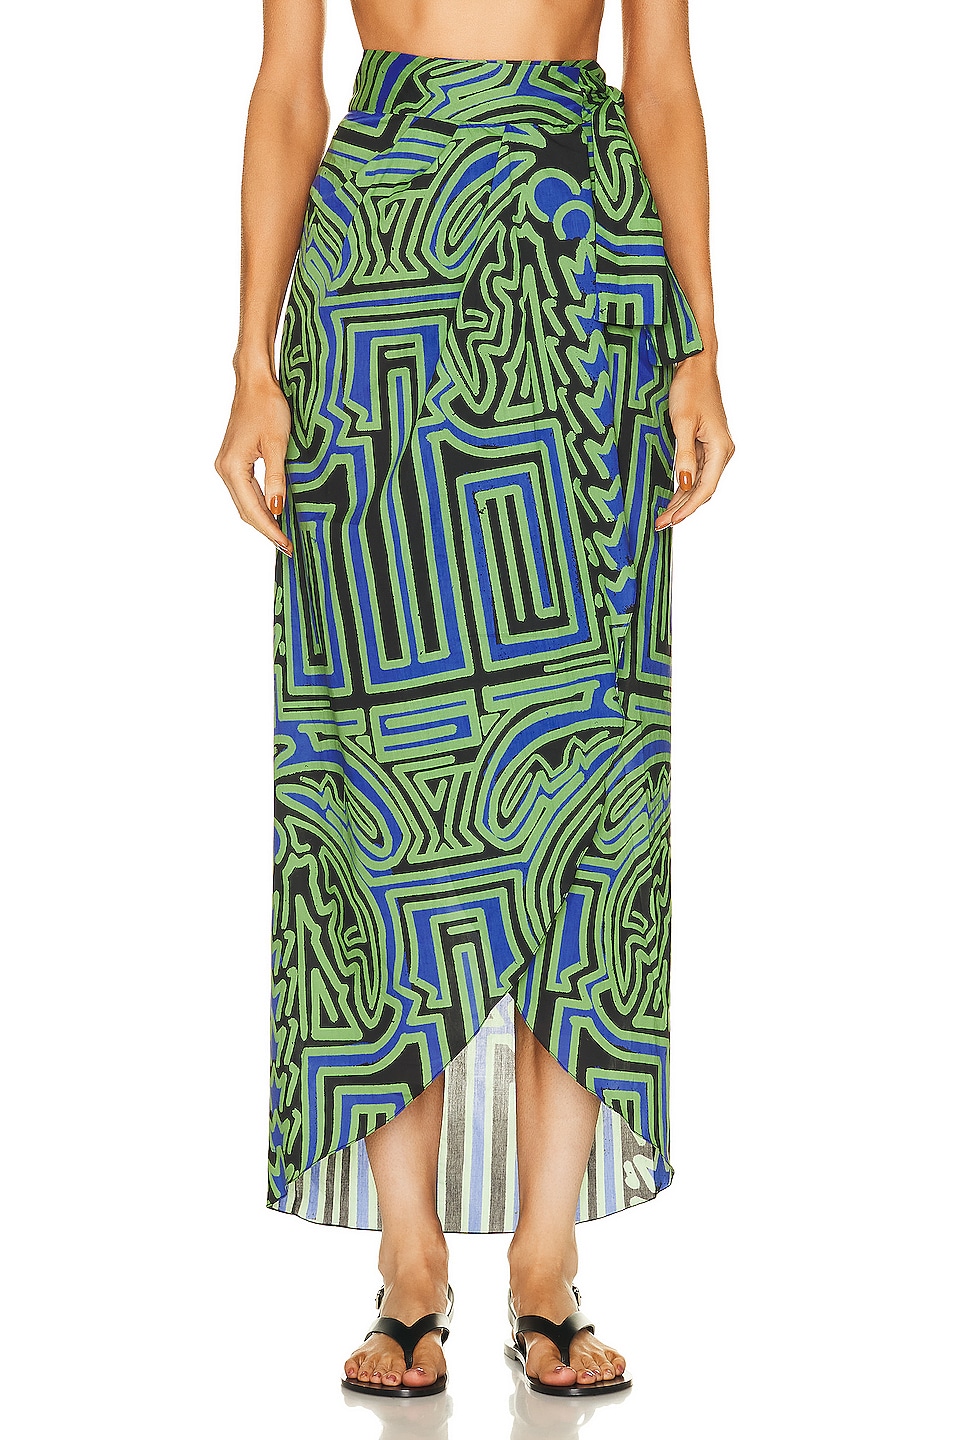 Image 1 of Johanna Ortiz Dialecto Tropical Wrap Skirt in Toile Black, Neon Greenery, & Blue